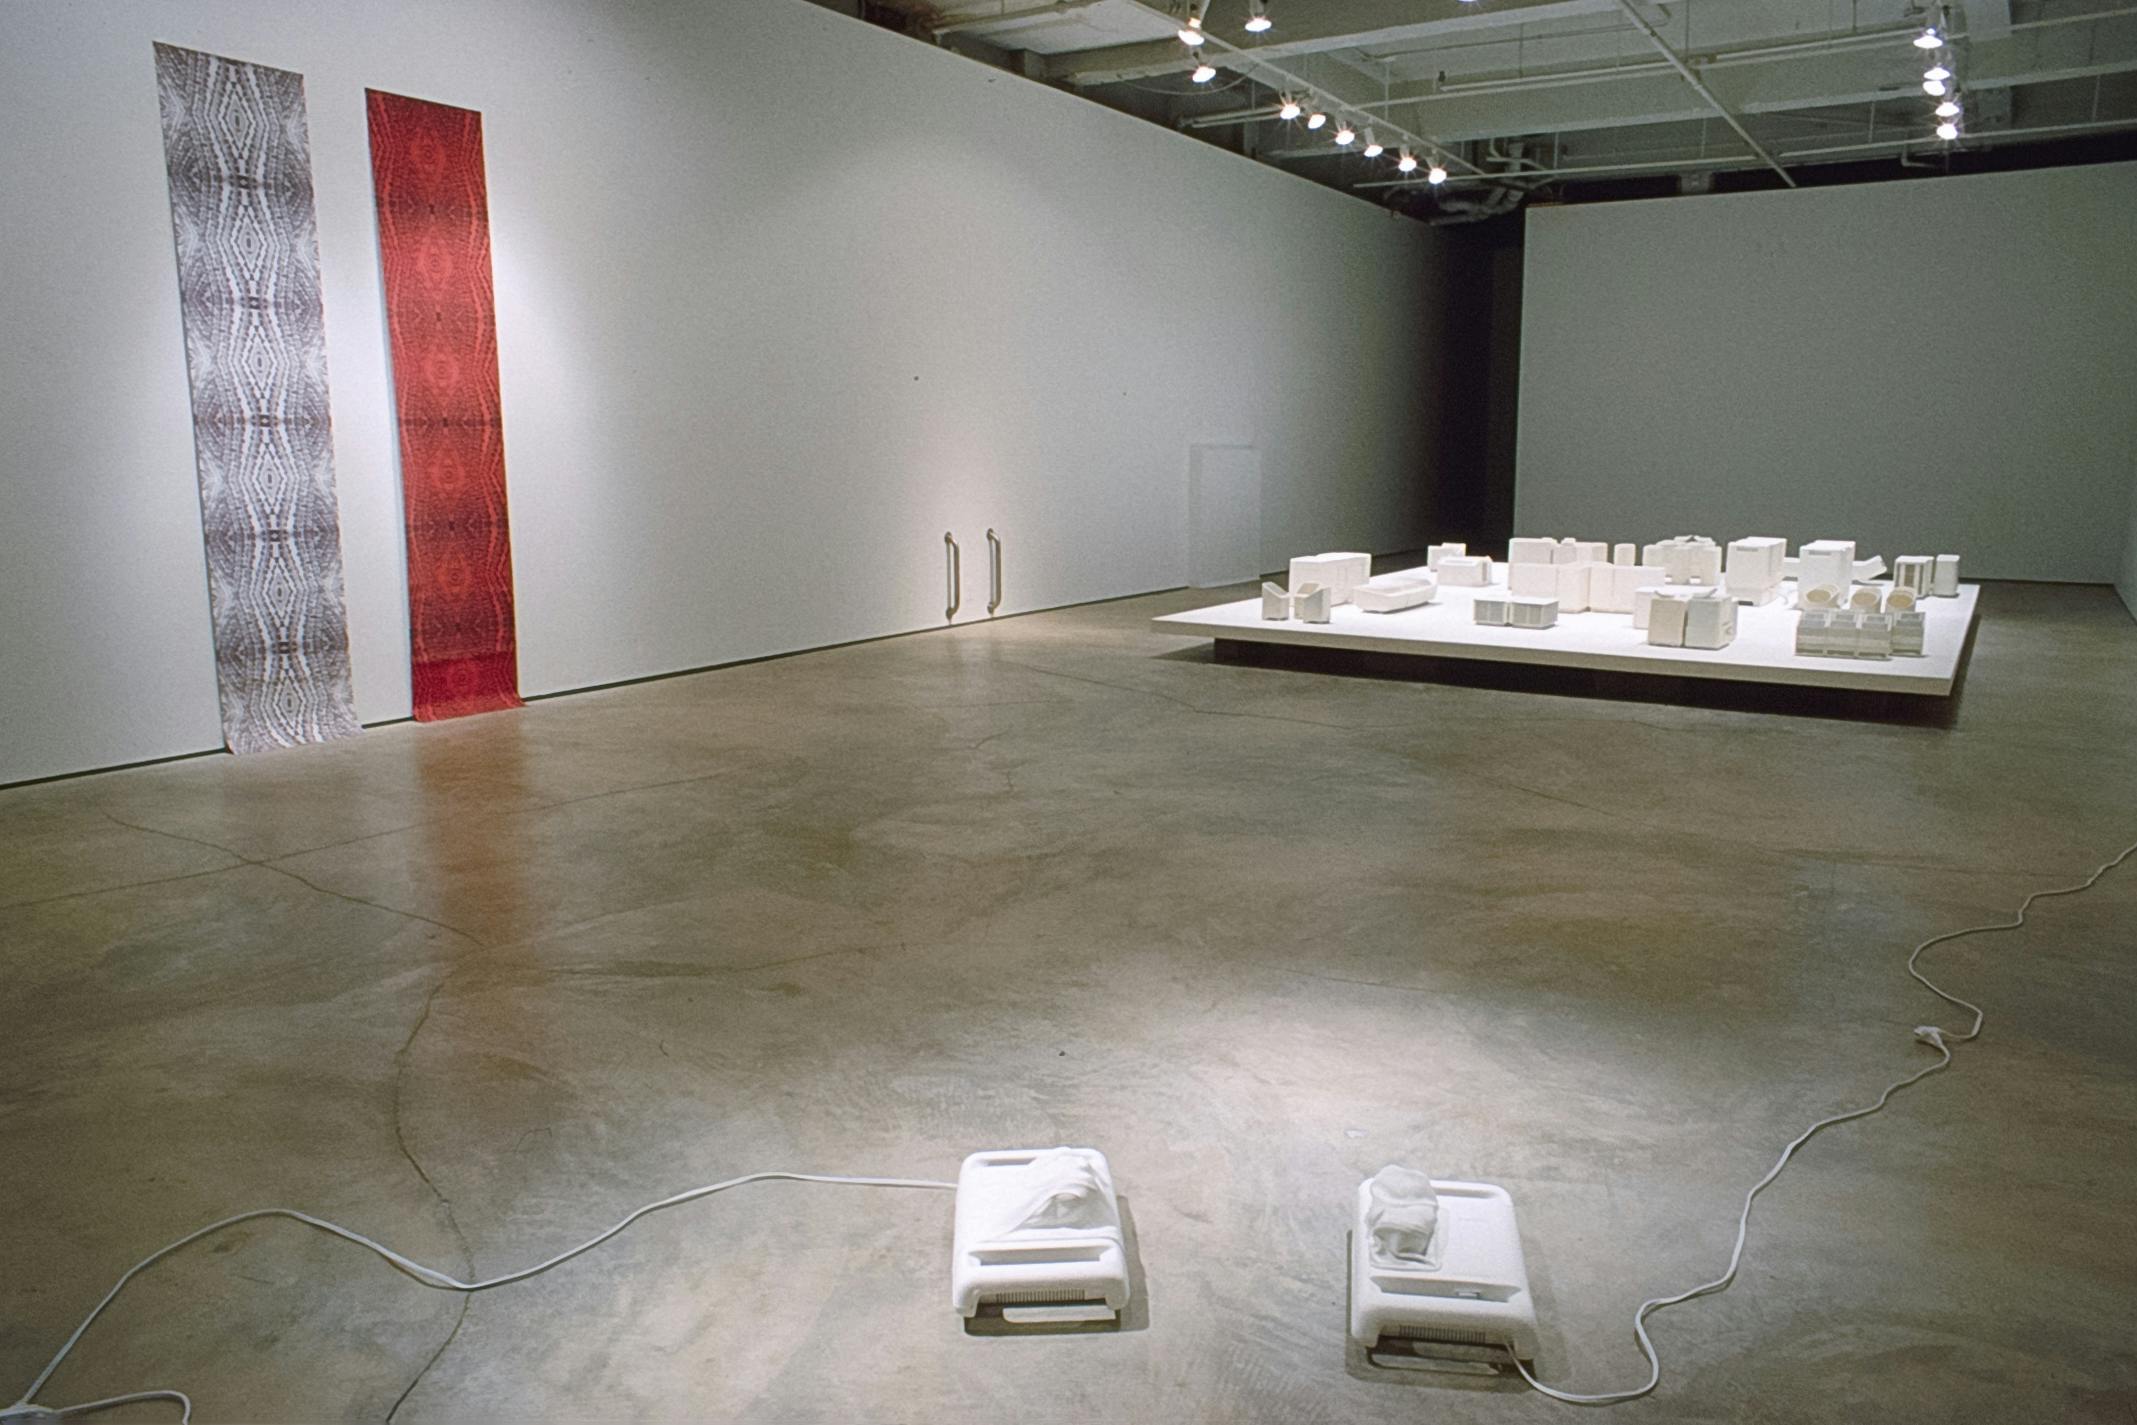 Several artworks are installed in the gallery. White miniatures of electronics are installed in the back. Two small white machines are connected to the cable and placed on the floor. 